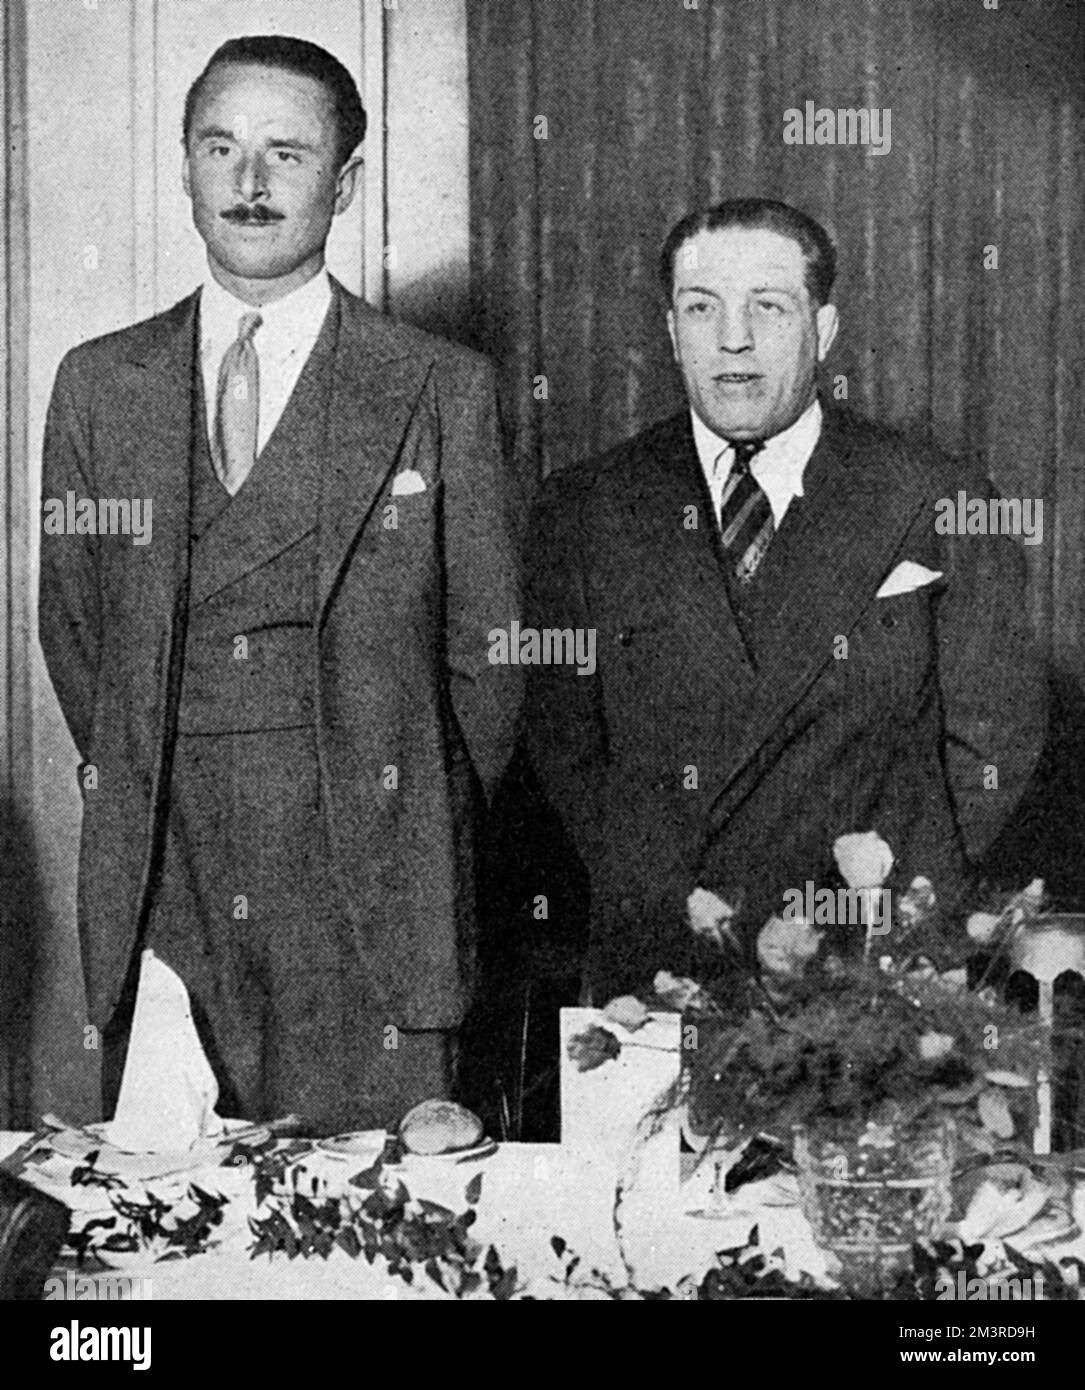 Kid Lewis, triple boxing champion and ex-holder of the world welterweight title who stood as a New Party candidate in Whitechapel, East London.  Pictured posing with the New Party leader, Sir Oswald Mosley at a luncheon given at the Caf&#x9812;oyal where Mosley and Lewis outlined a club movement in which sport and politics were to play a prominent part. The New Party, formed by Oswald Mosley, was a political party formed in 1931 after Mosley resigned from the Labour party. Based on the 'Mosley Memorandum', the Party sought to establish a national policy to meet the economic crisis brought abou Stock Photo